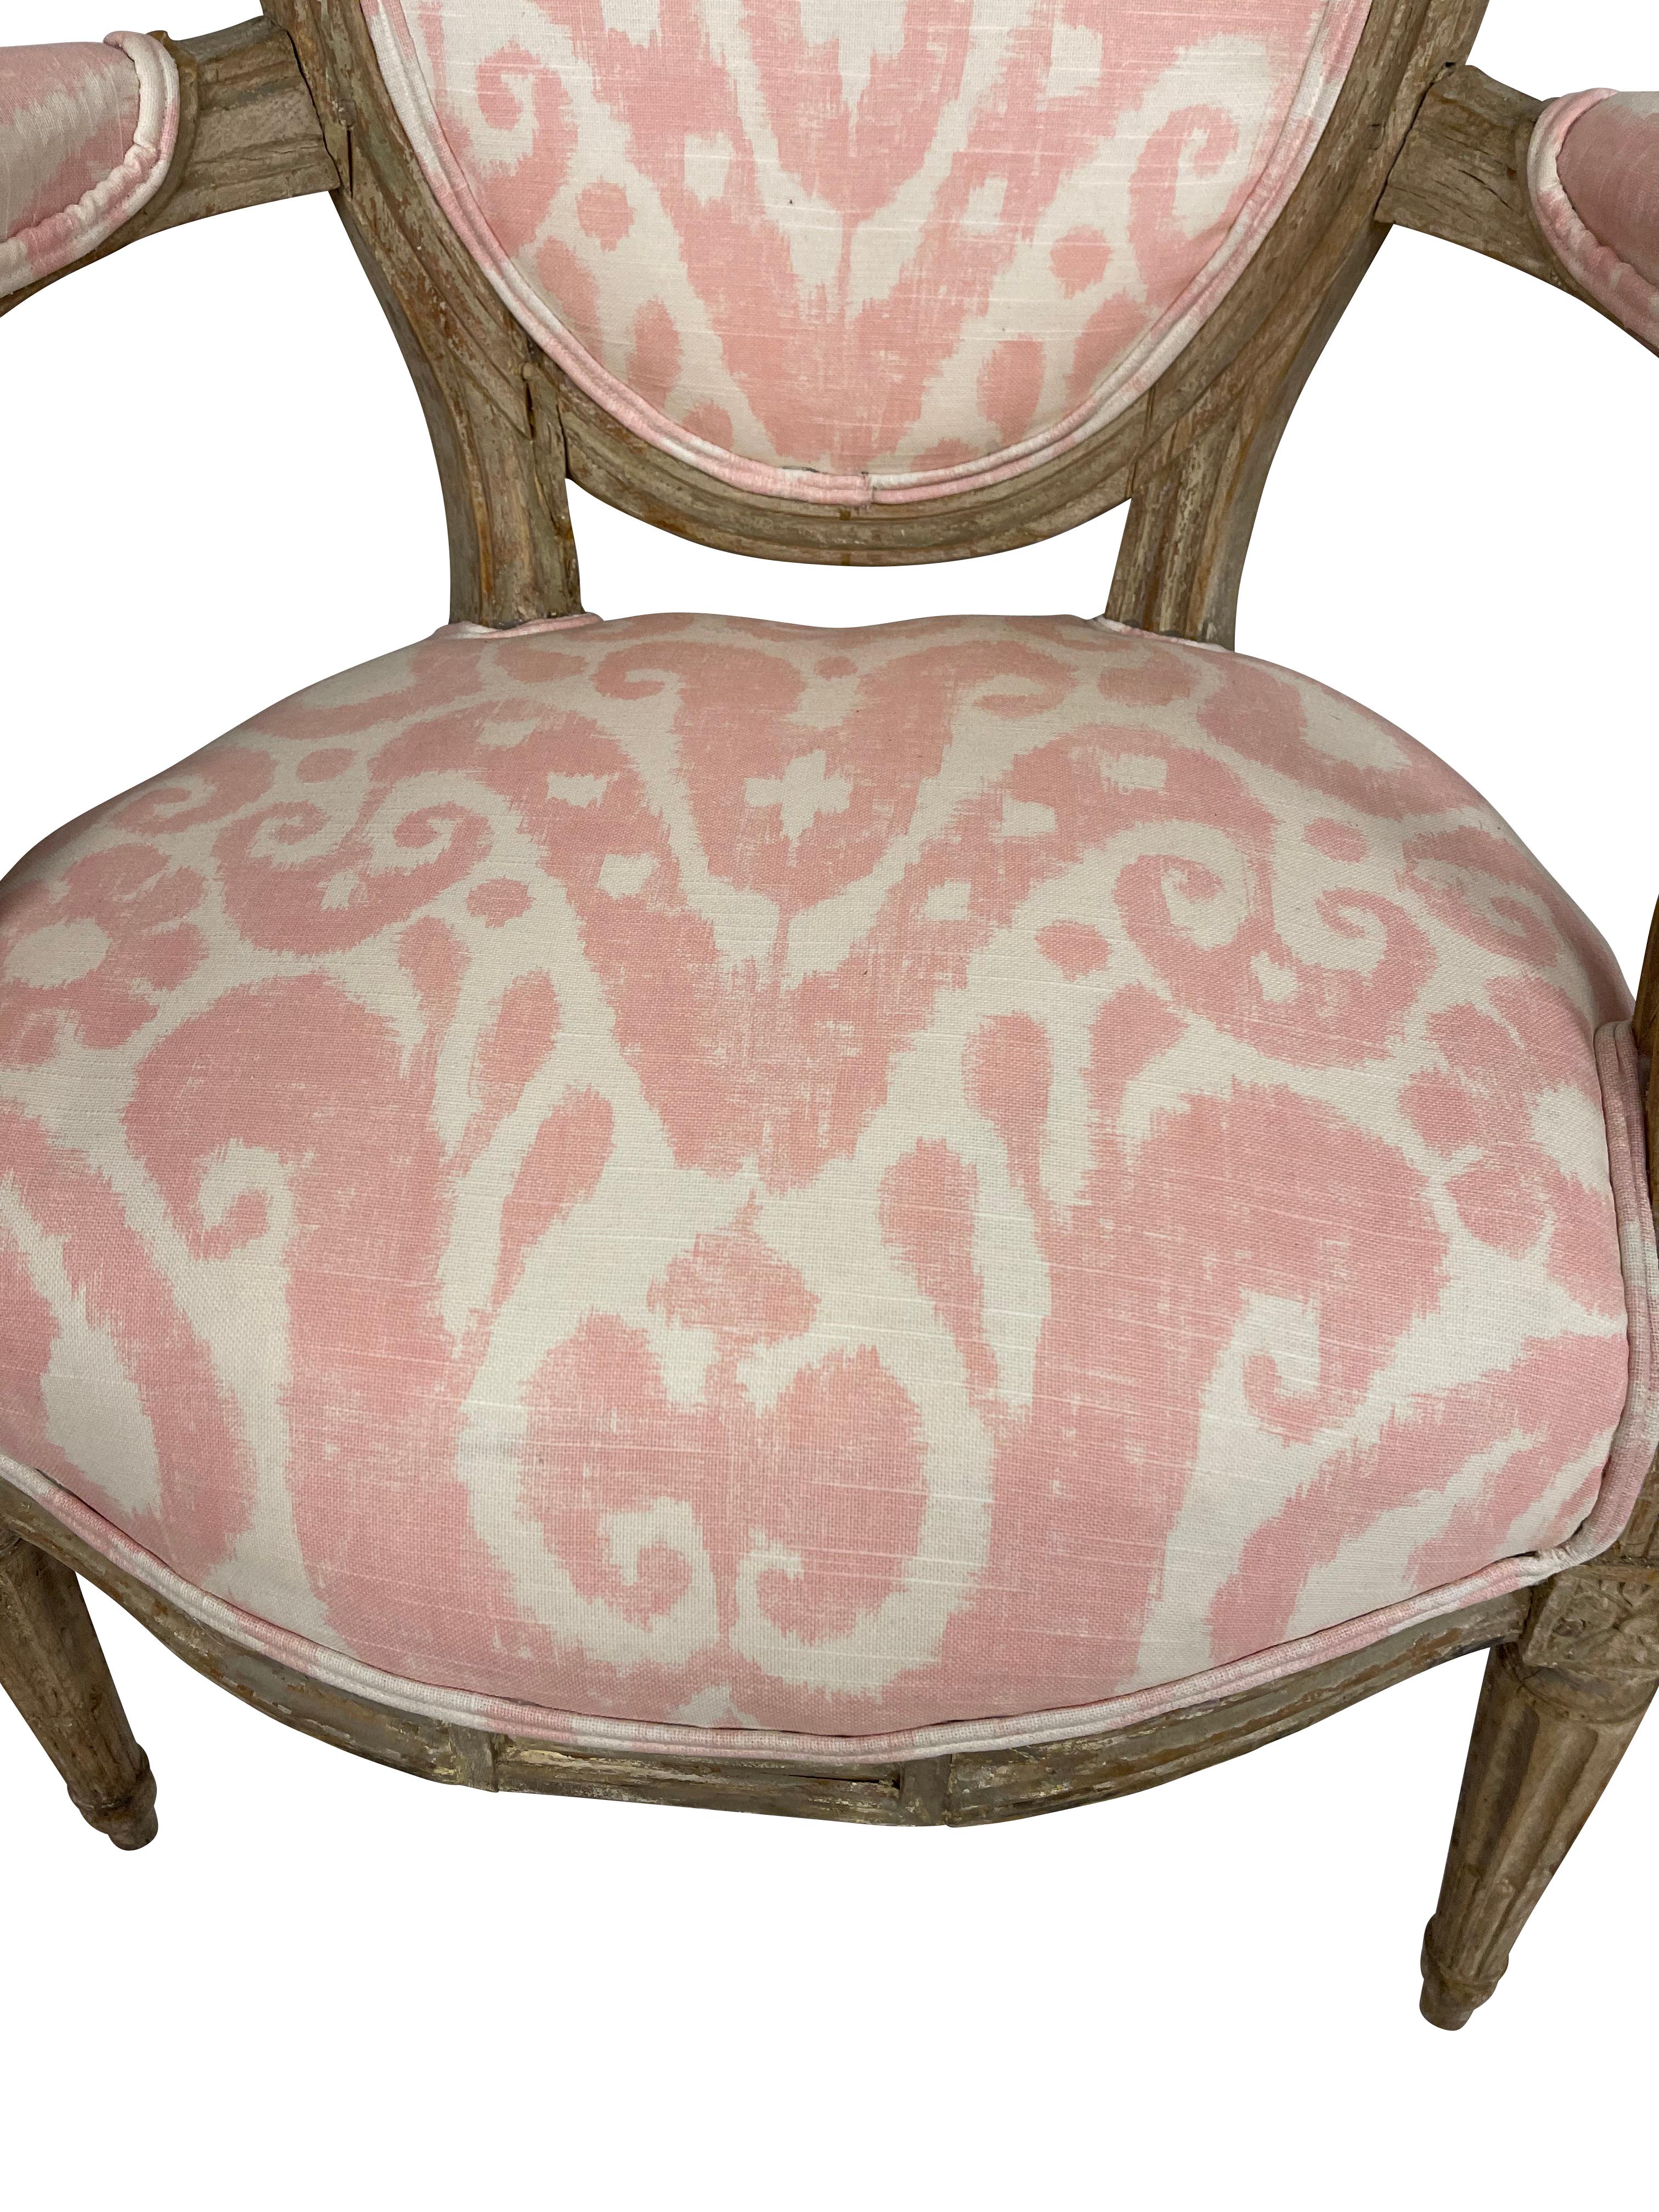 Louis XVI Style Grey Painted Armchairs in Pink and White Ikat Upholstery In Good Condition For Sale In Essex, MA